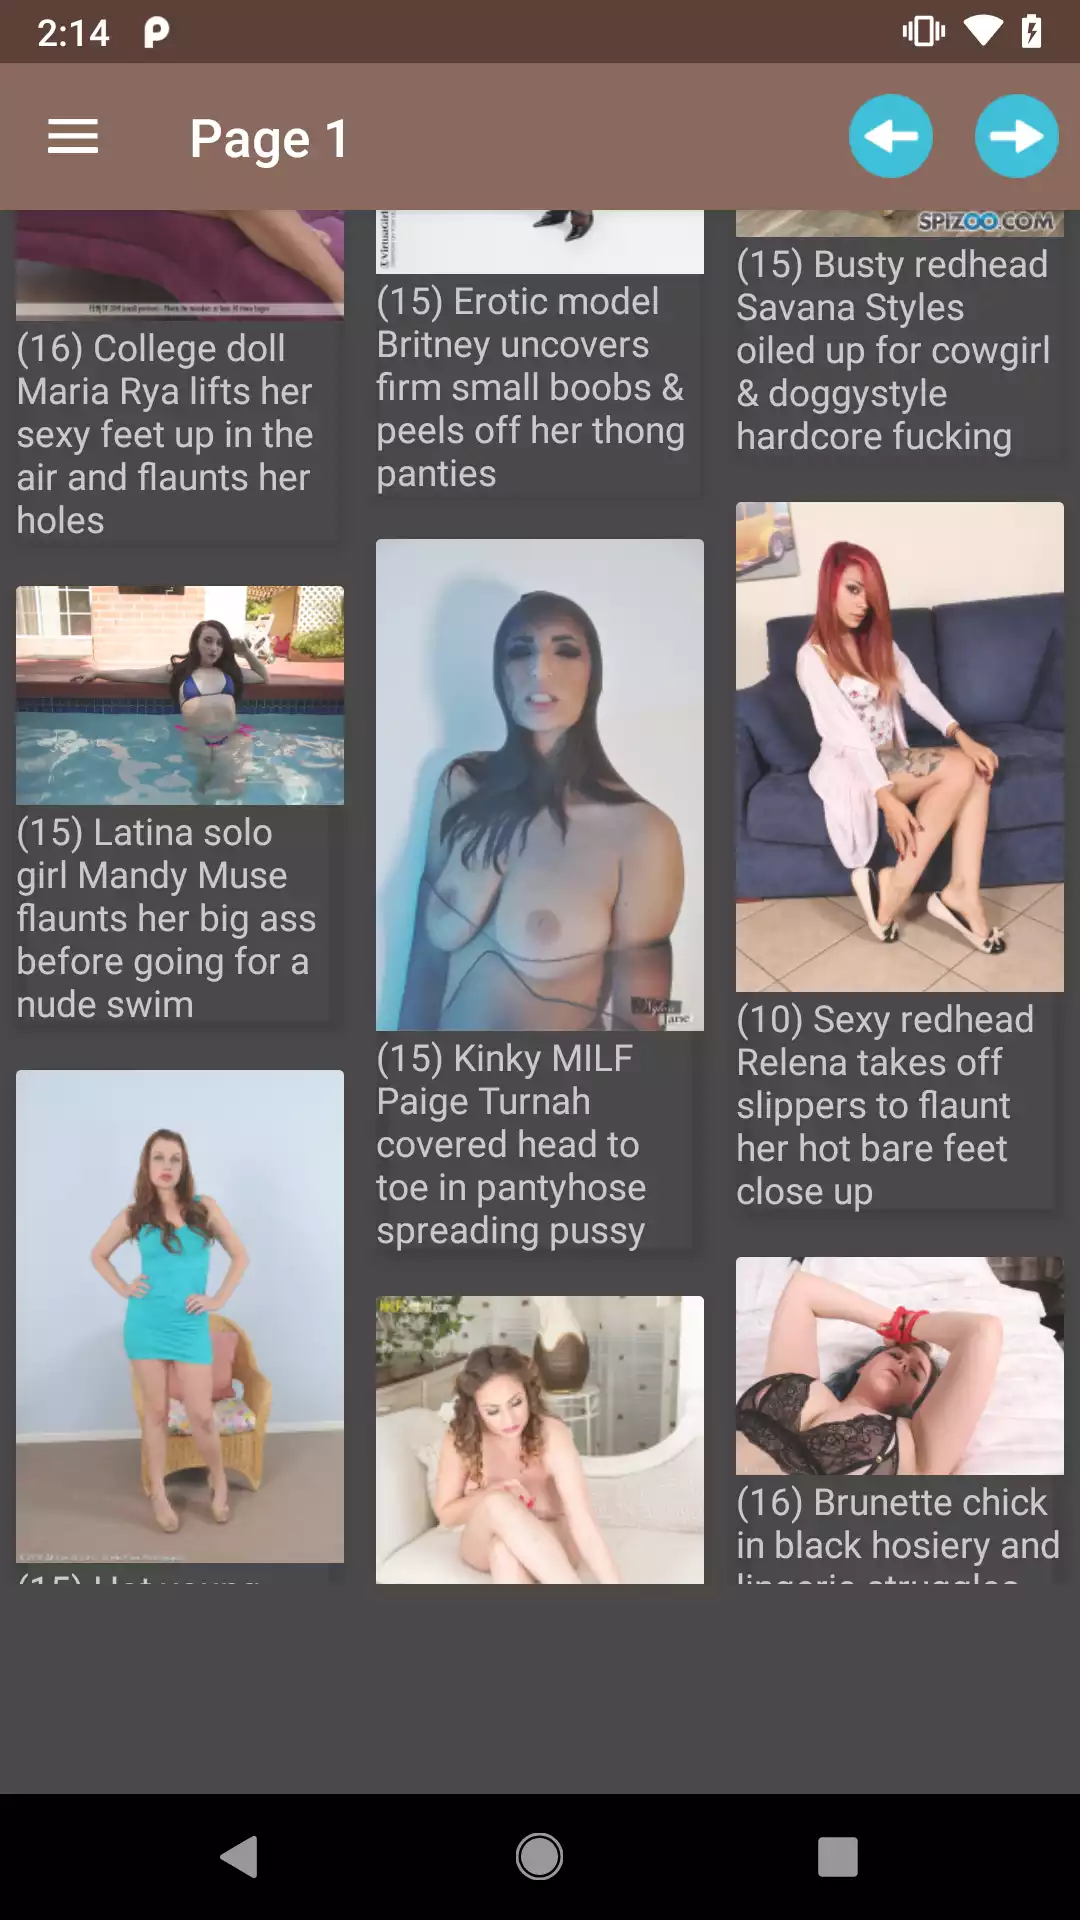 Foot Fetish download,mature,app,pics,adult,android,sexy,futanari,pictures,browser,hentia,mythras,photos,wallpapers,lair,phone,apk,hentai,porn,cosplay,galleries